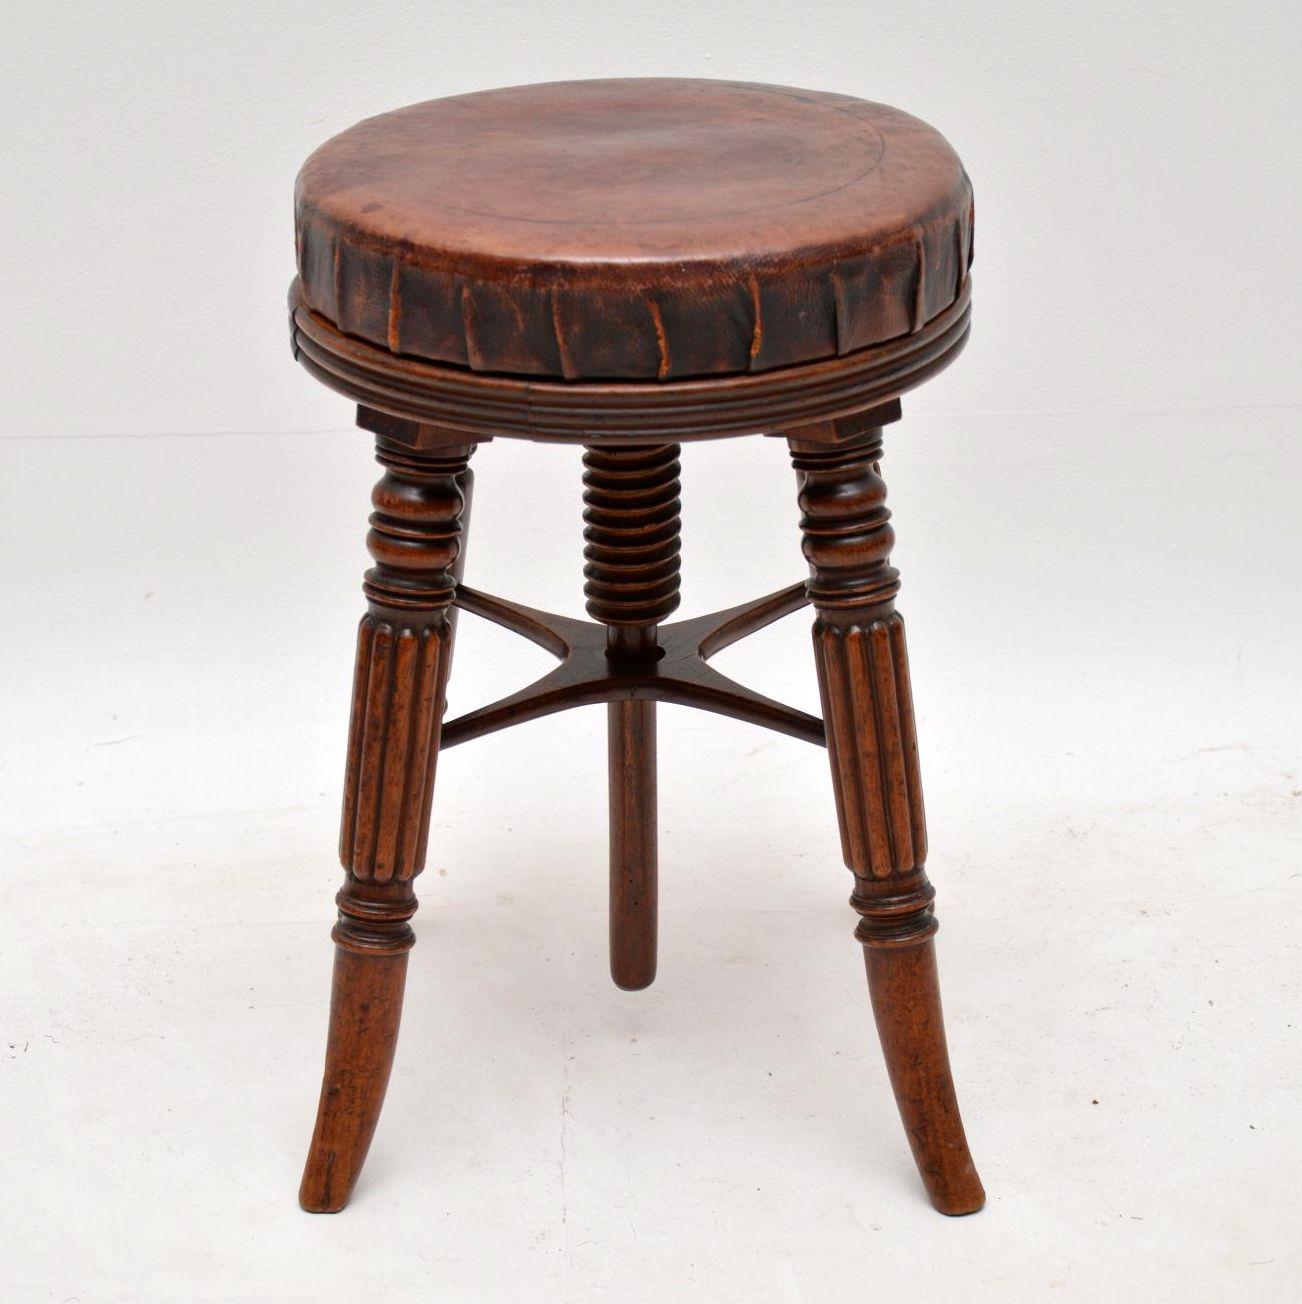 Antique Victorian mahogany adjustable piano stool with the original leather upholstery which is still in good condition for it's age and shows lovely character. The leather does show wear and natural ageing, but there are no holes or splits. This